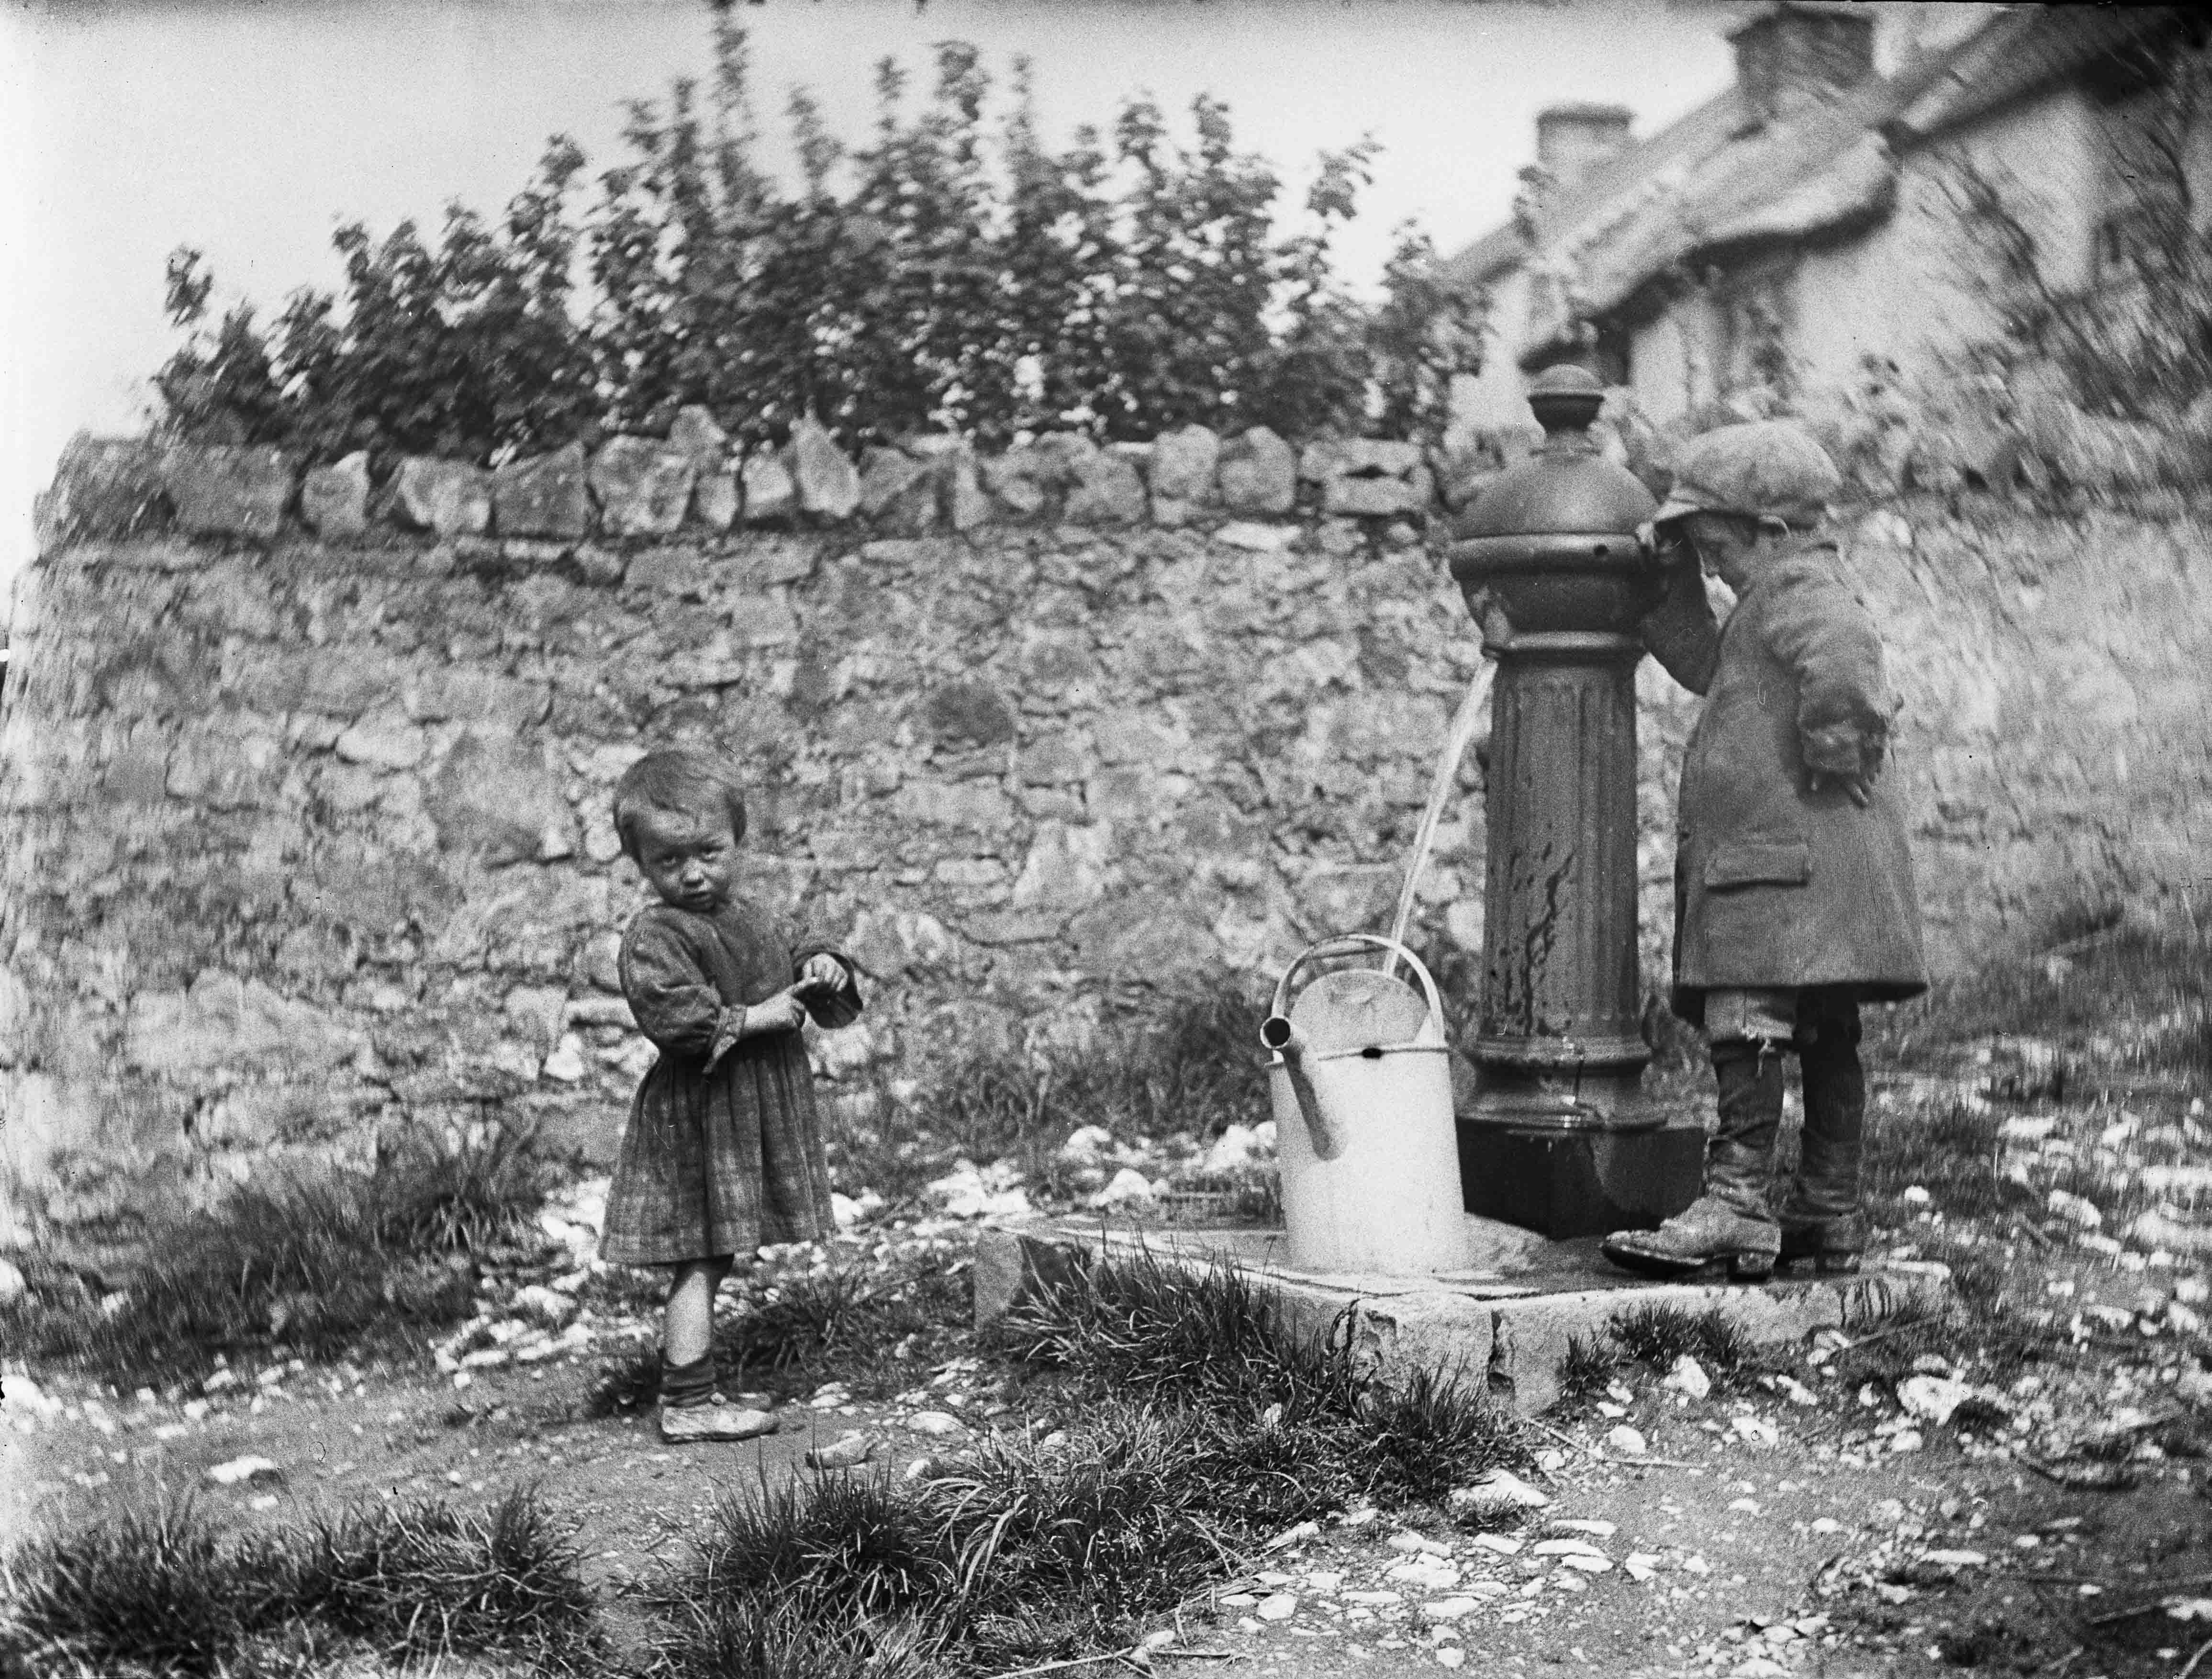 Children collecting water at a pump